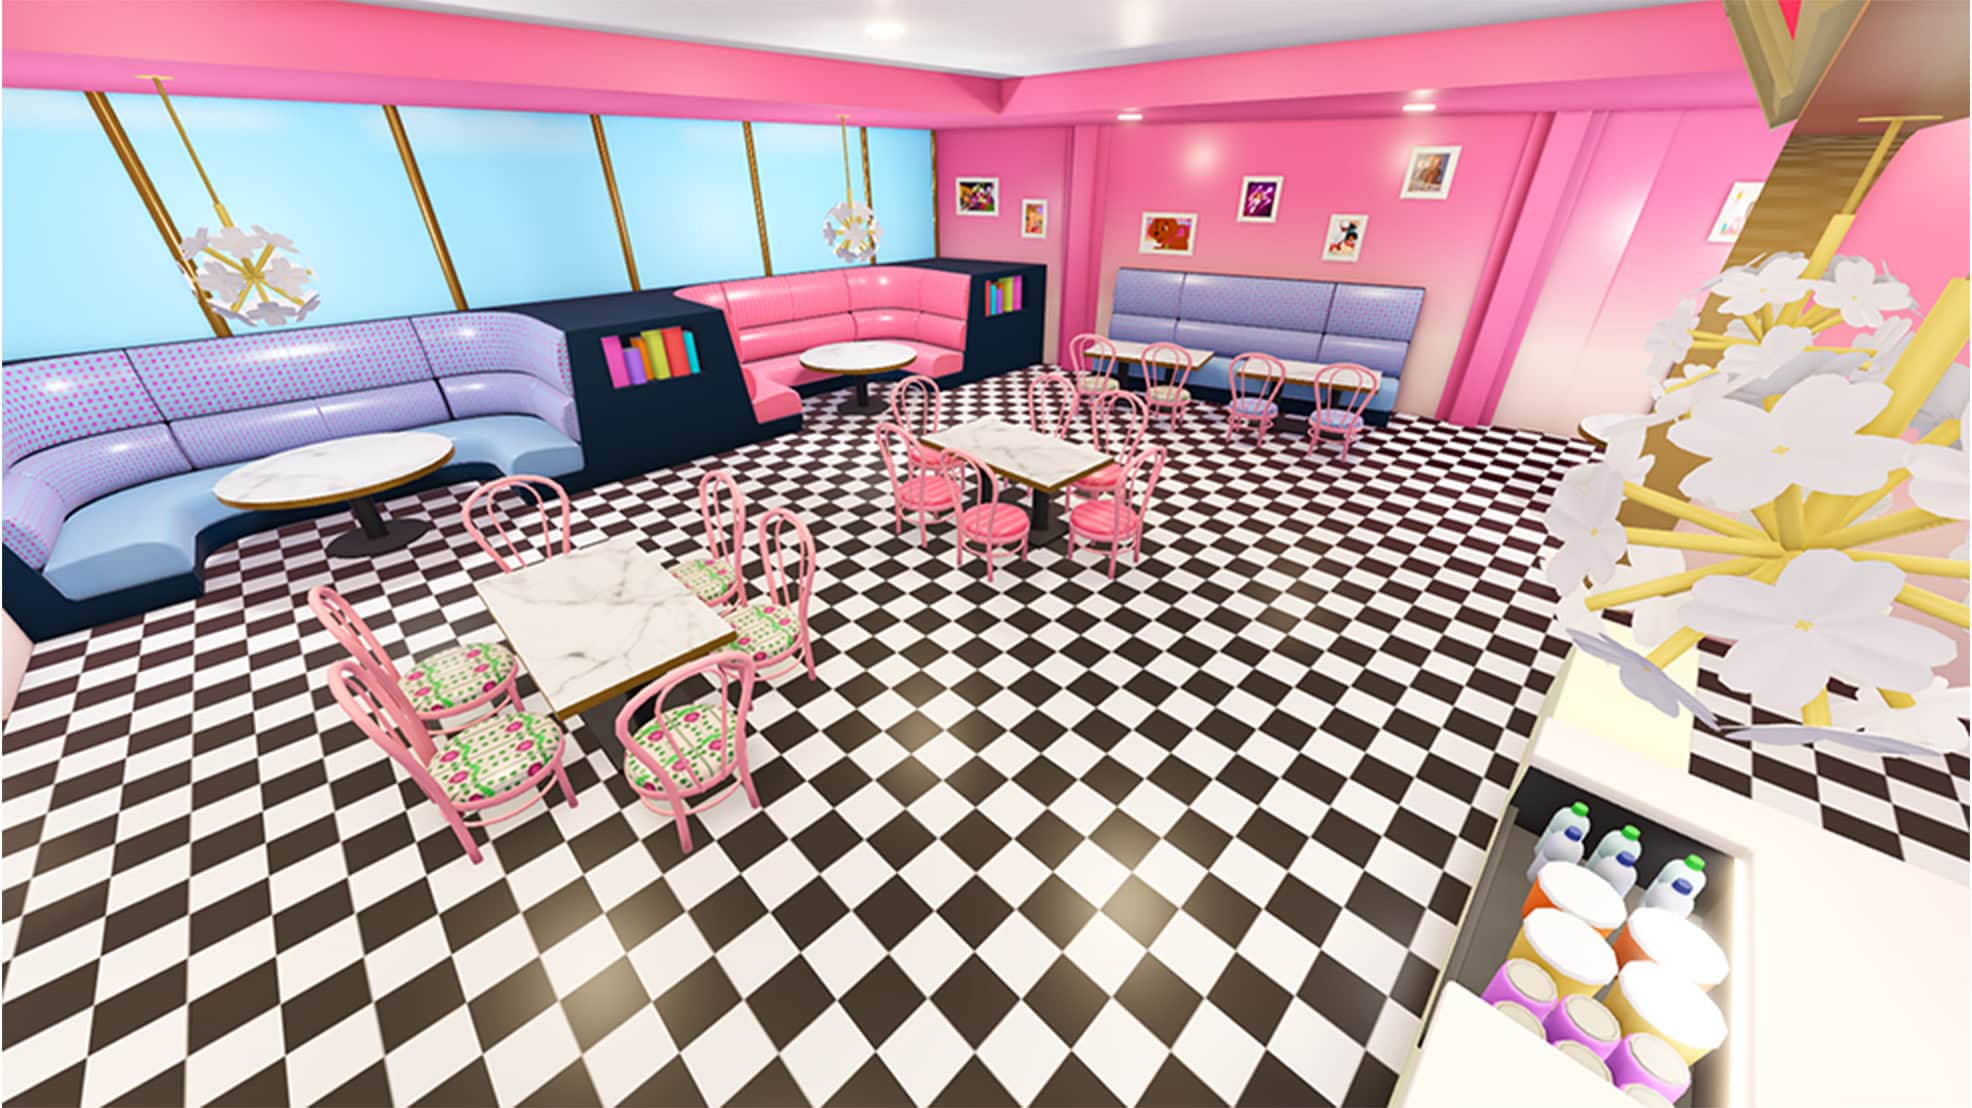 View inside American Girl virtual cafe